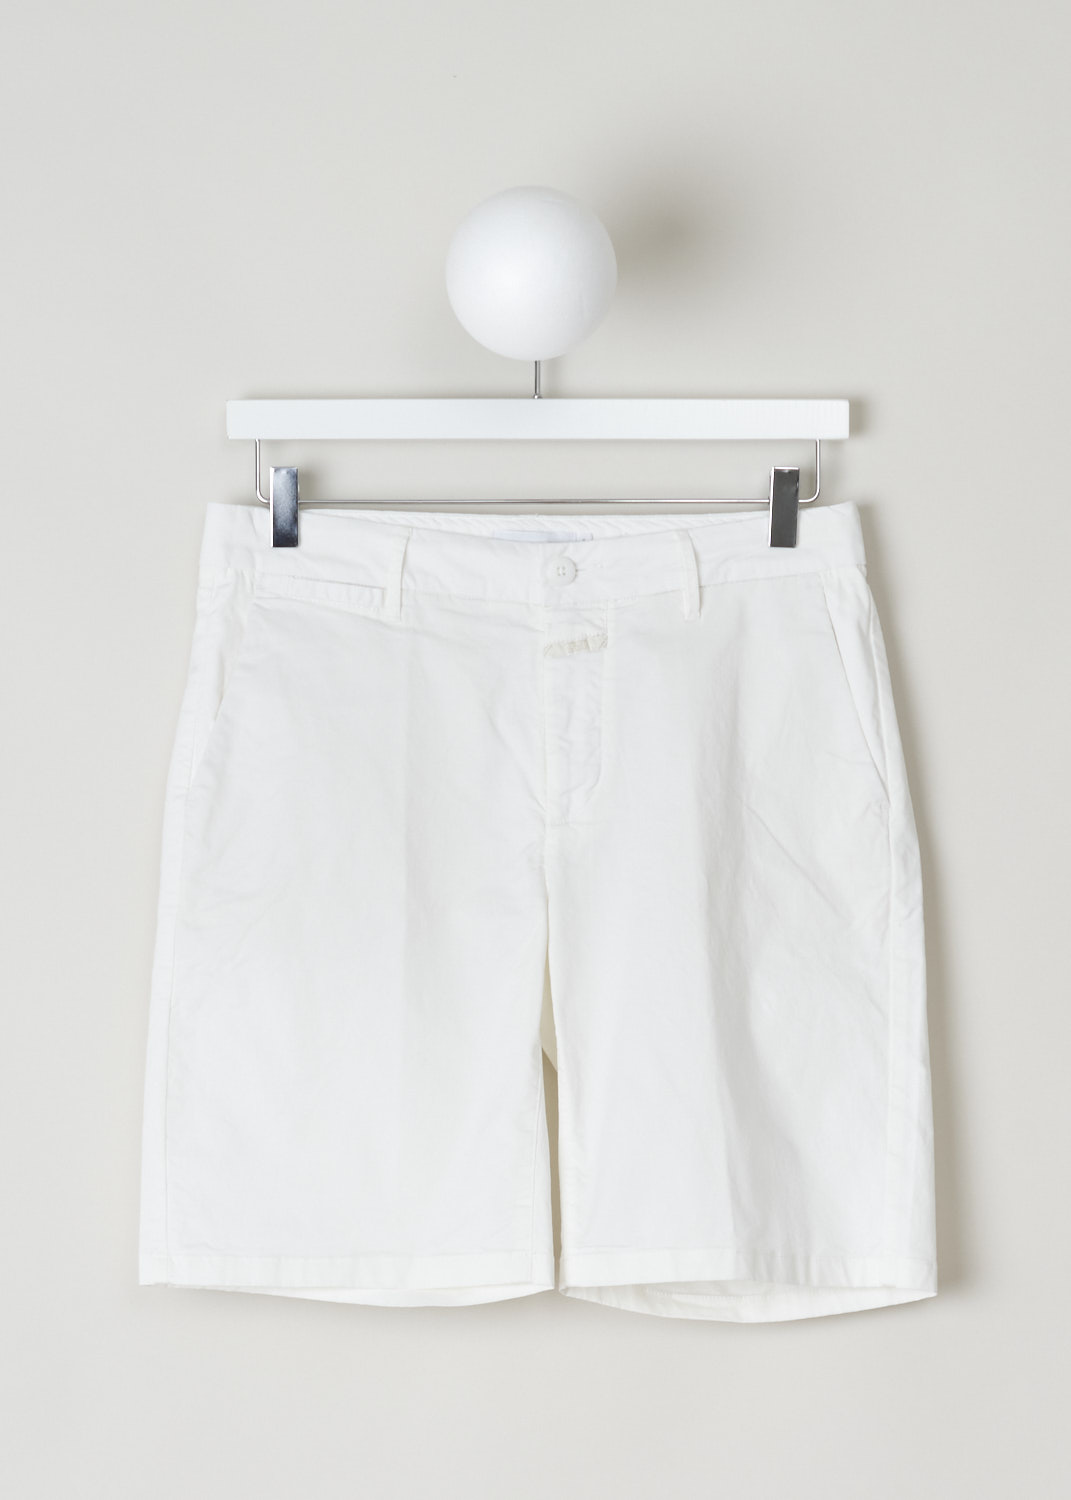 Closed, White shorts, holden_C92244_30D_20_218, white, front, Brighten up your wardrobe with these white shorts. Made in the chino model, so it has forward slanted pockets on the front and two jetted pockets on the back. The closure option here comes in the form of zipper and a regular button.  